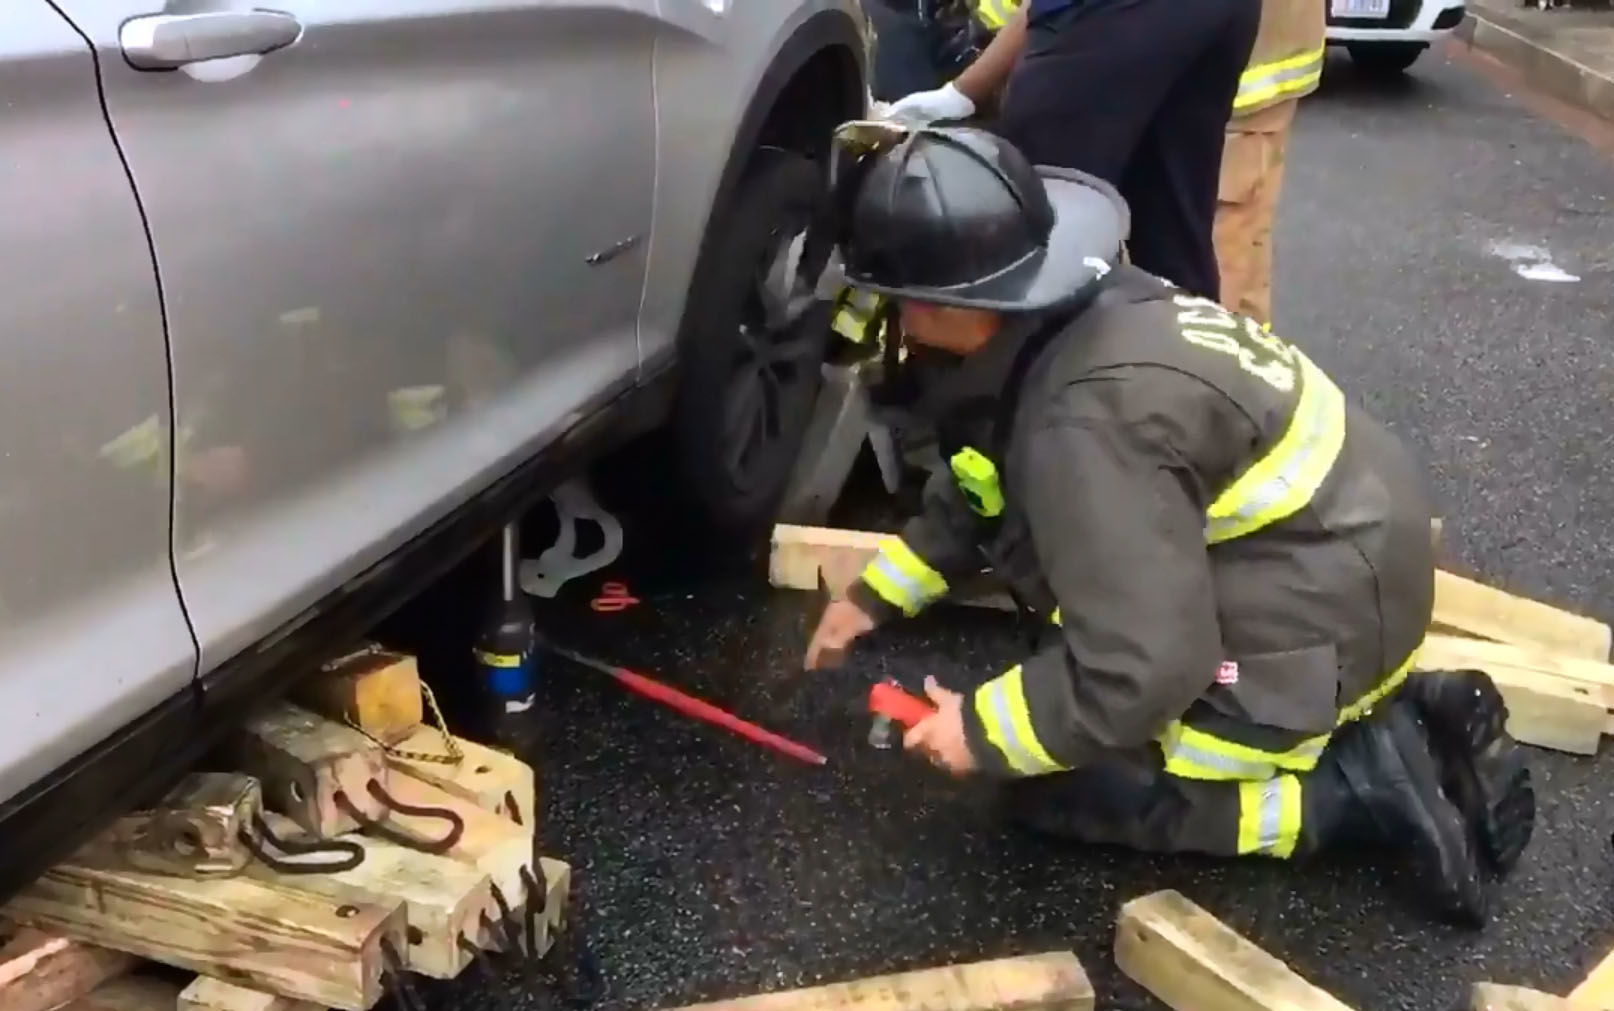 Videos tweeted by the D.C. Fire and EMS Service showed firefighters working to free the man who had become trapped under a silver SUV. (Courtesy D.C. Fire and EMS)